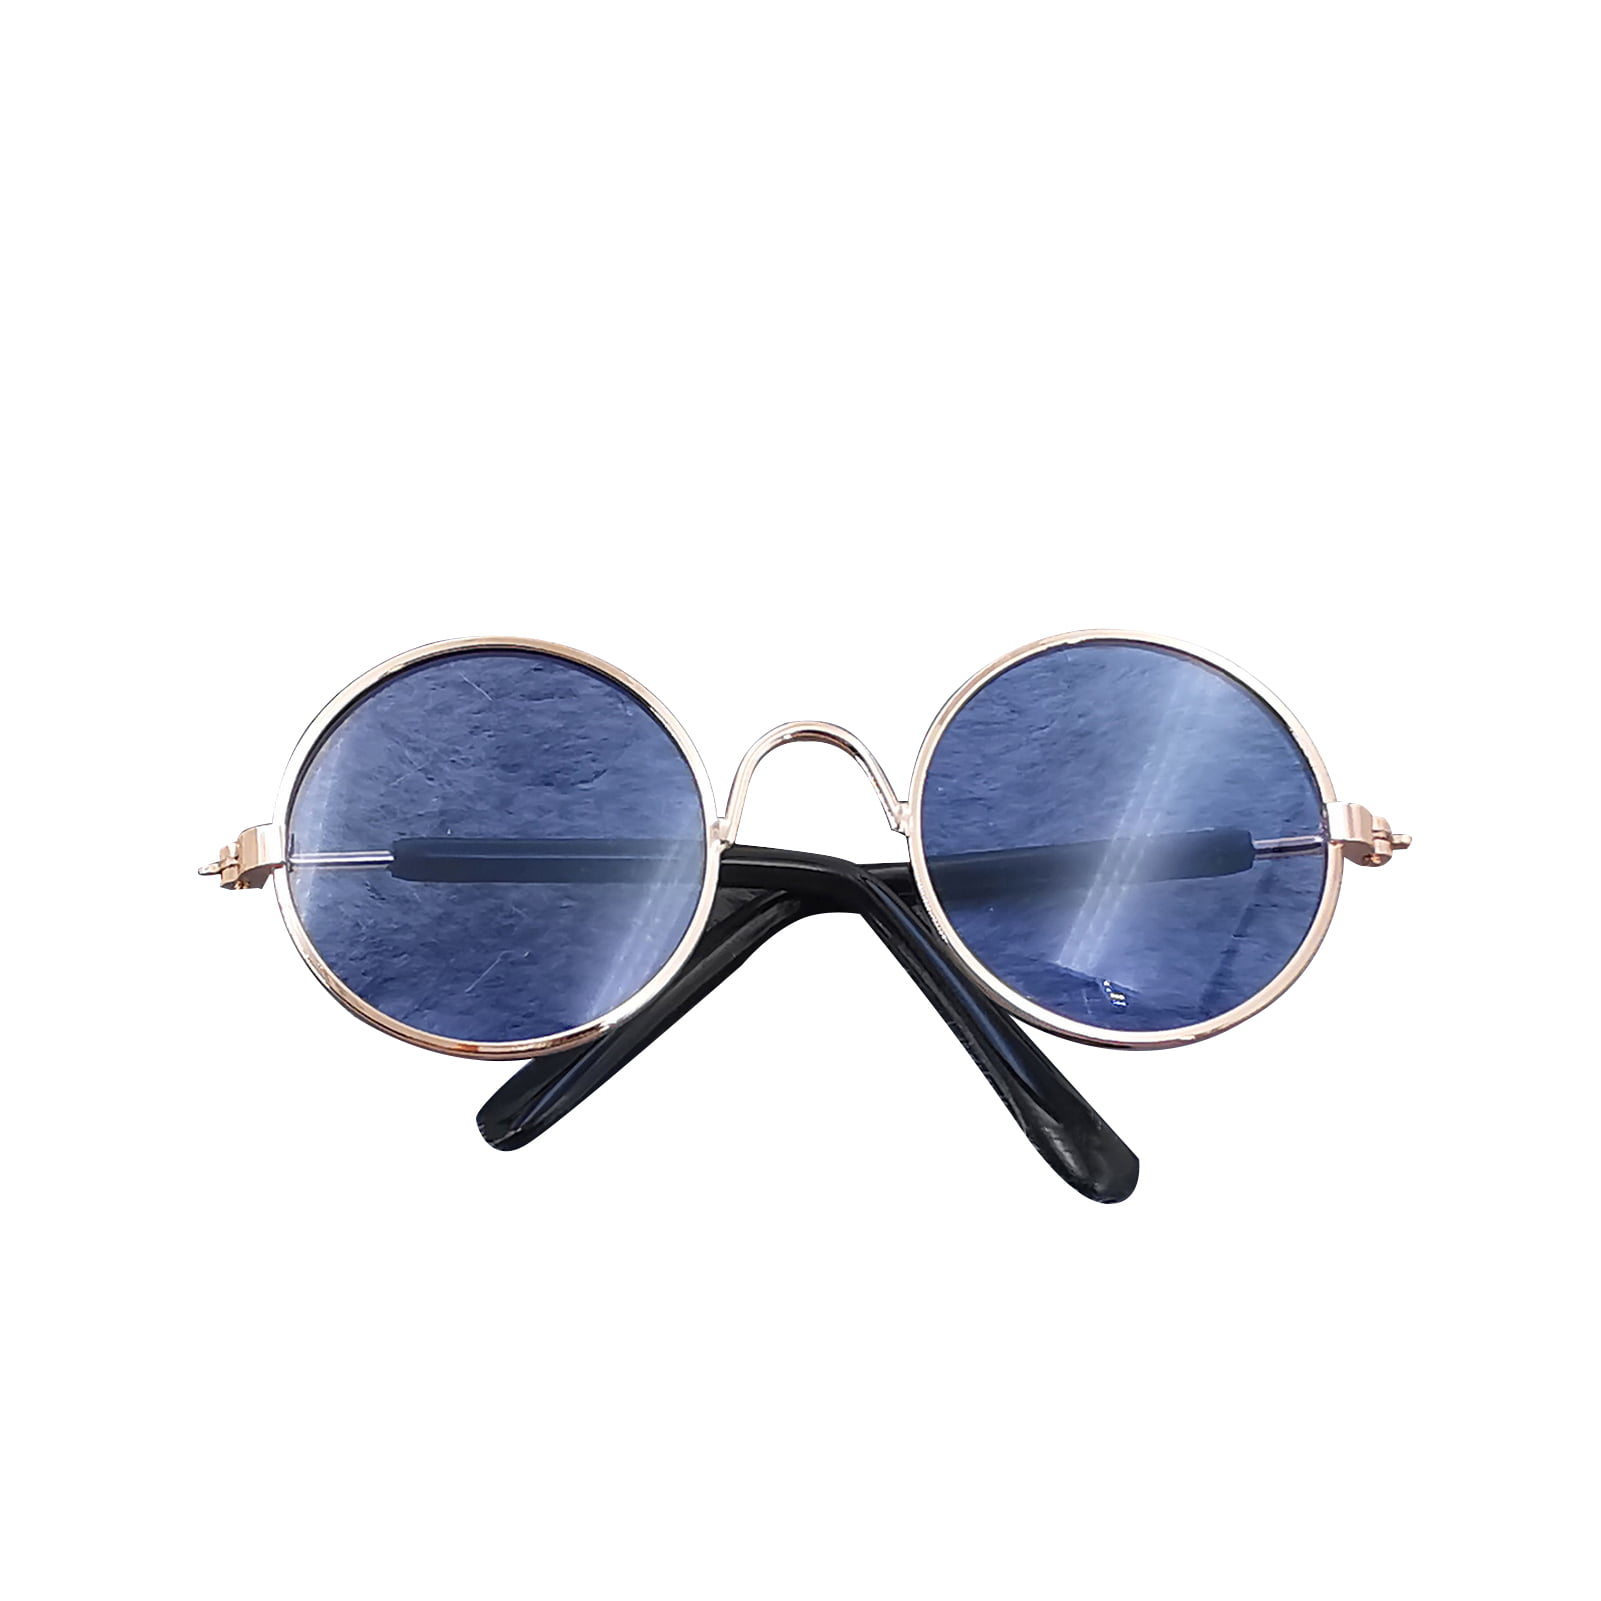 Costume Glasses 70's Style Details about   Silver Aviator Sunglasses 